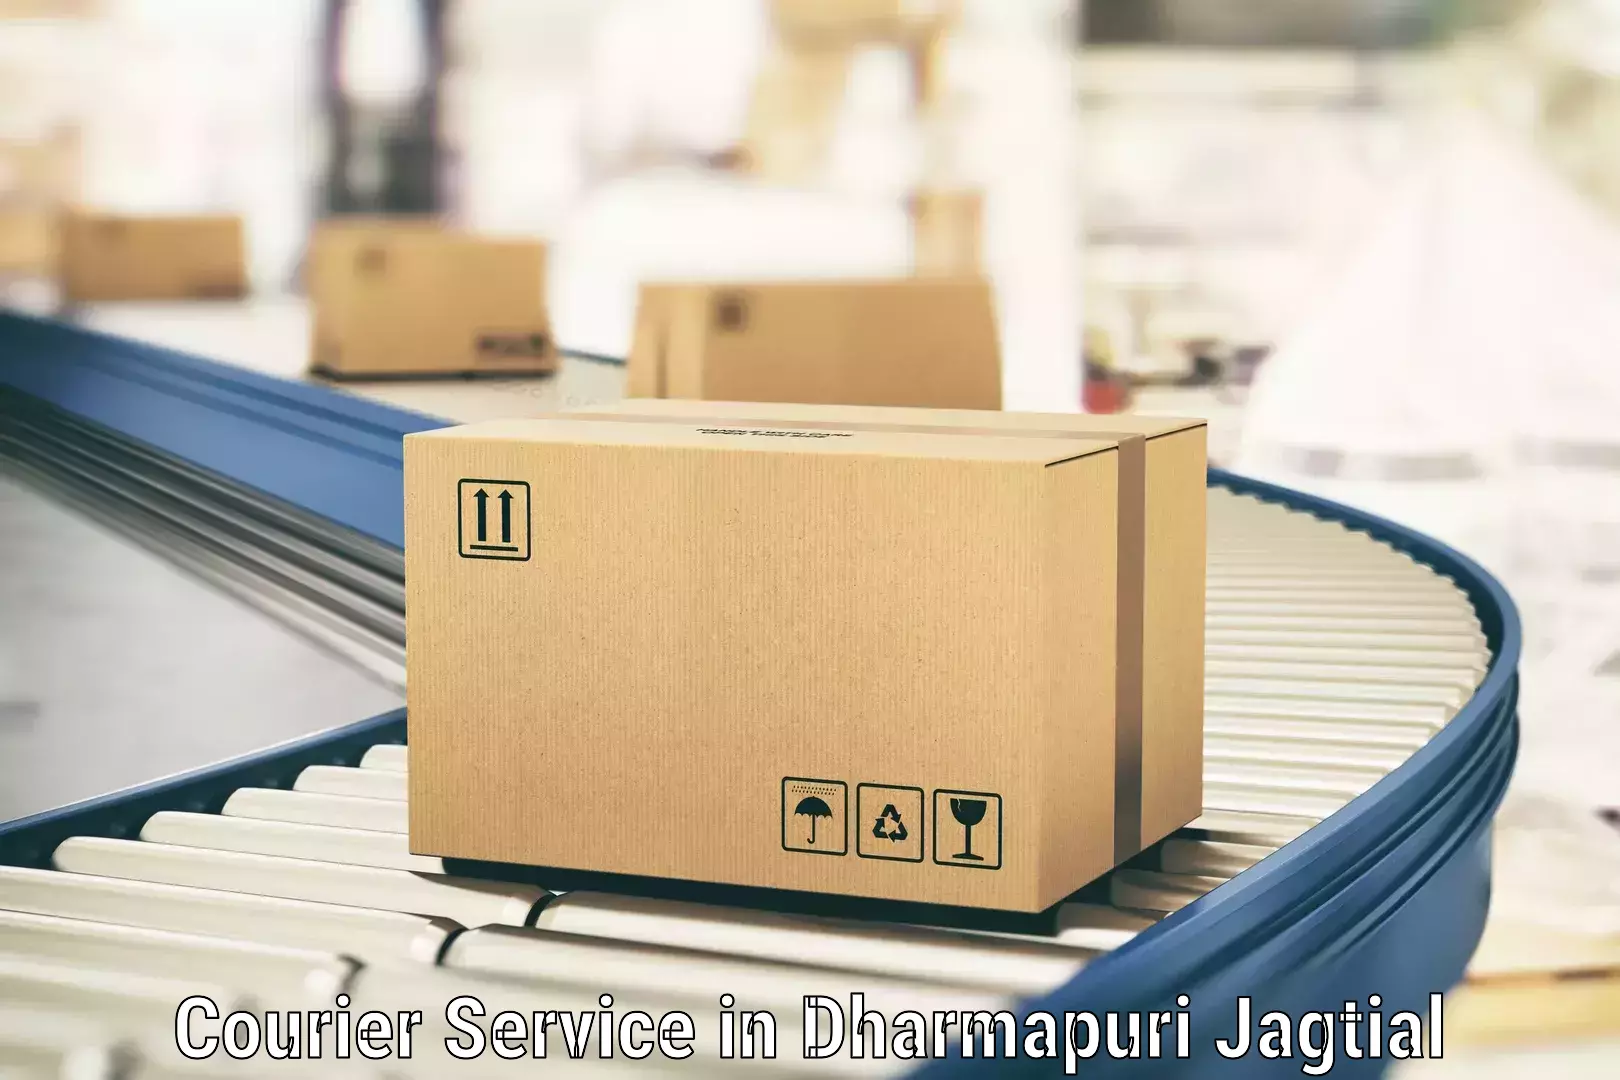 State-of-the-art courier technology in Dharmapuri Jagtial